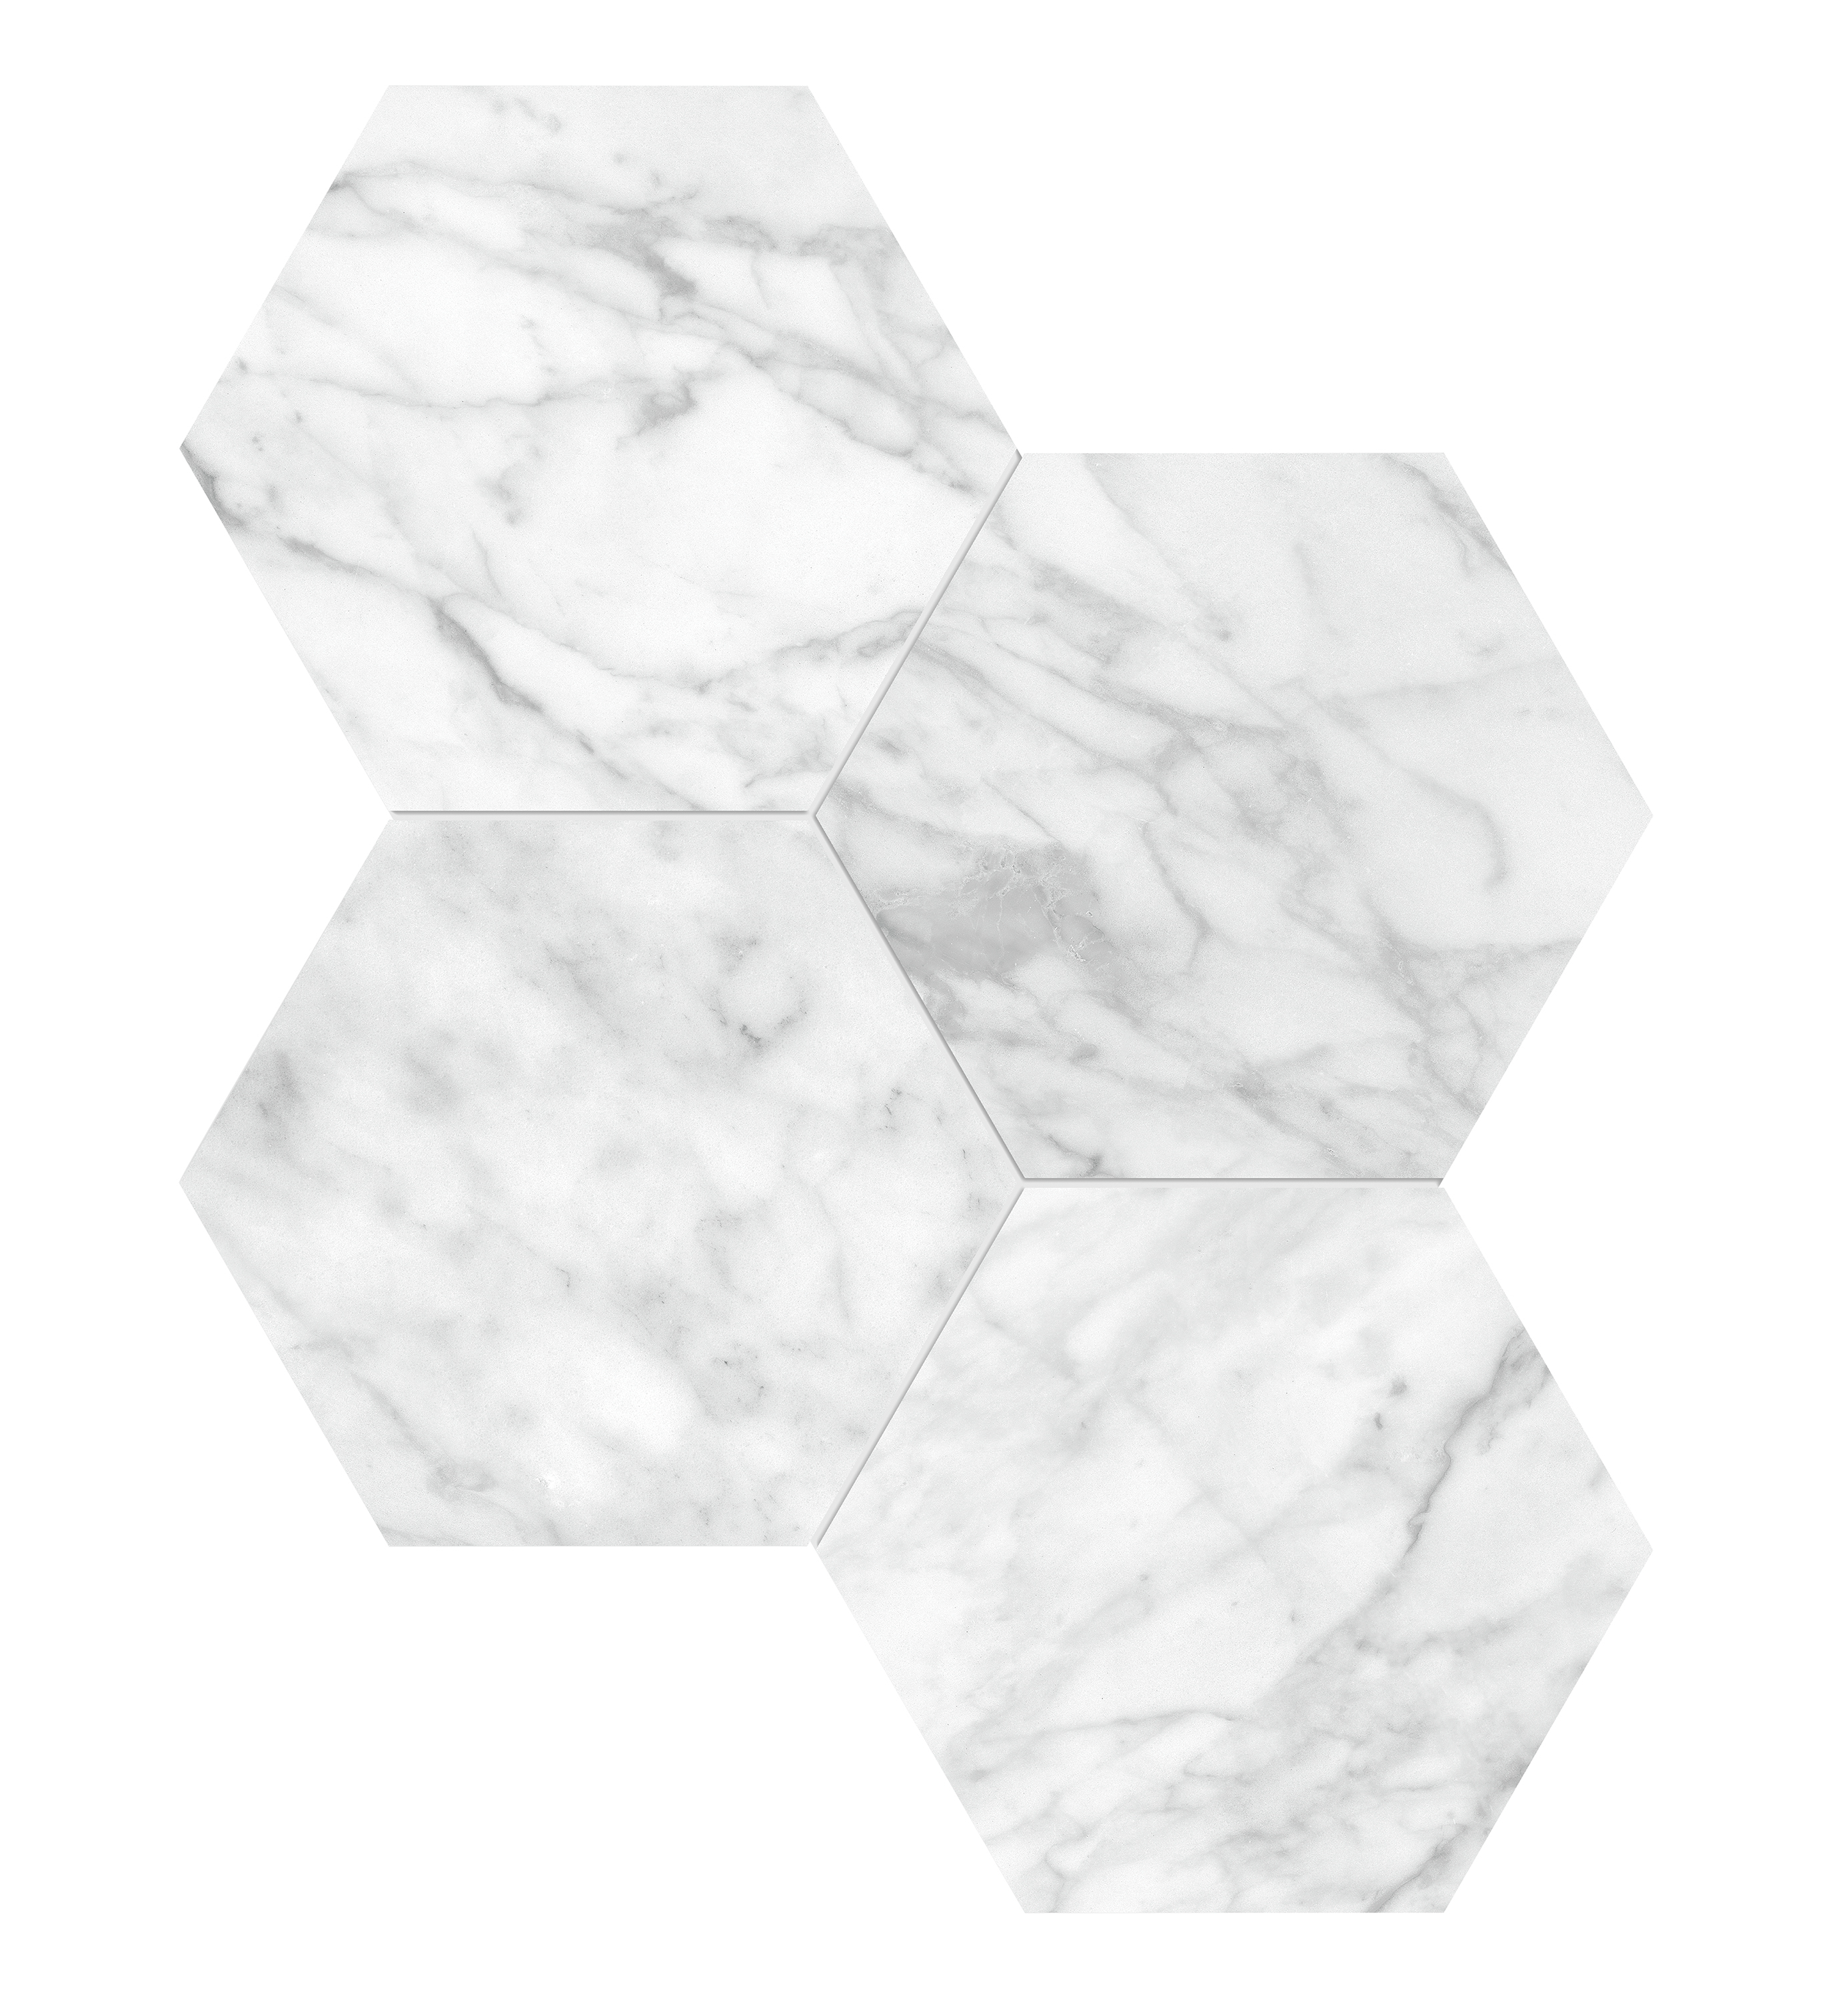 carrara gioia hexagon 6-inch pattern glazed porcelain mosaic from la marca anatolia collection distributed by surface group international honed finish straight edge edge mesh shape